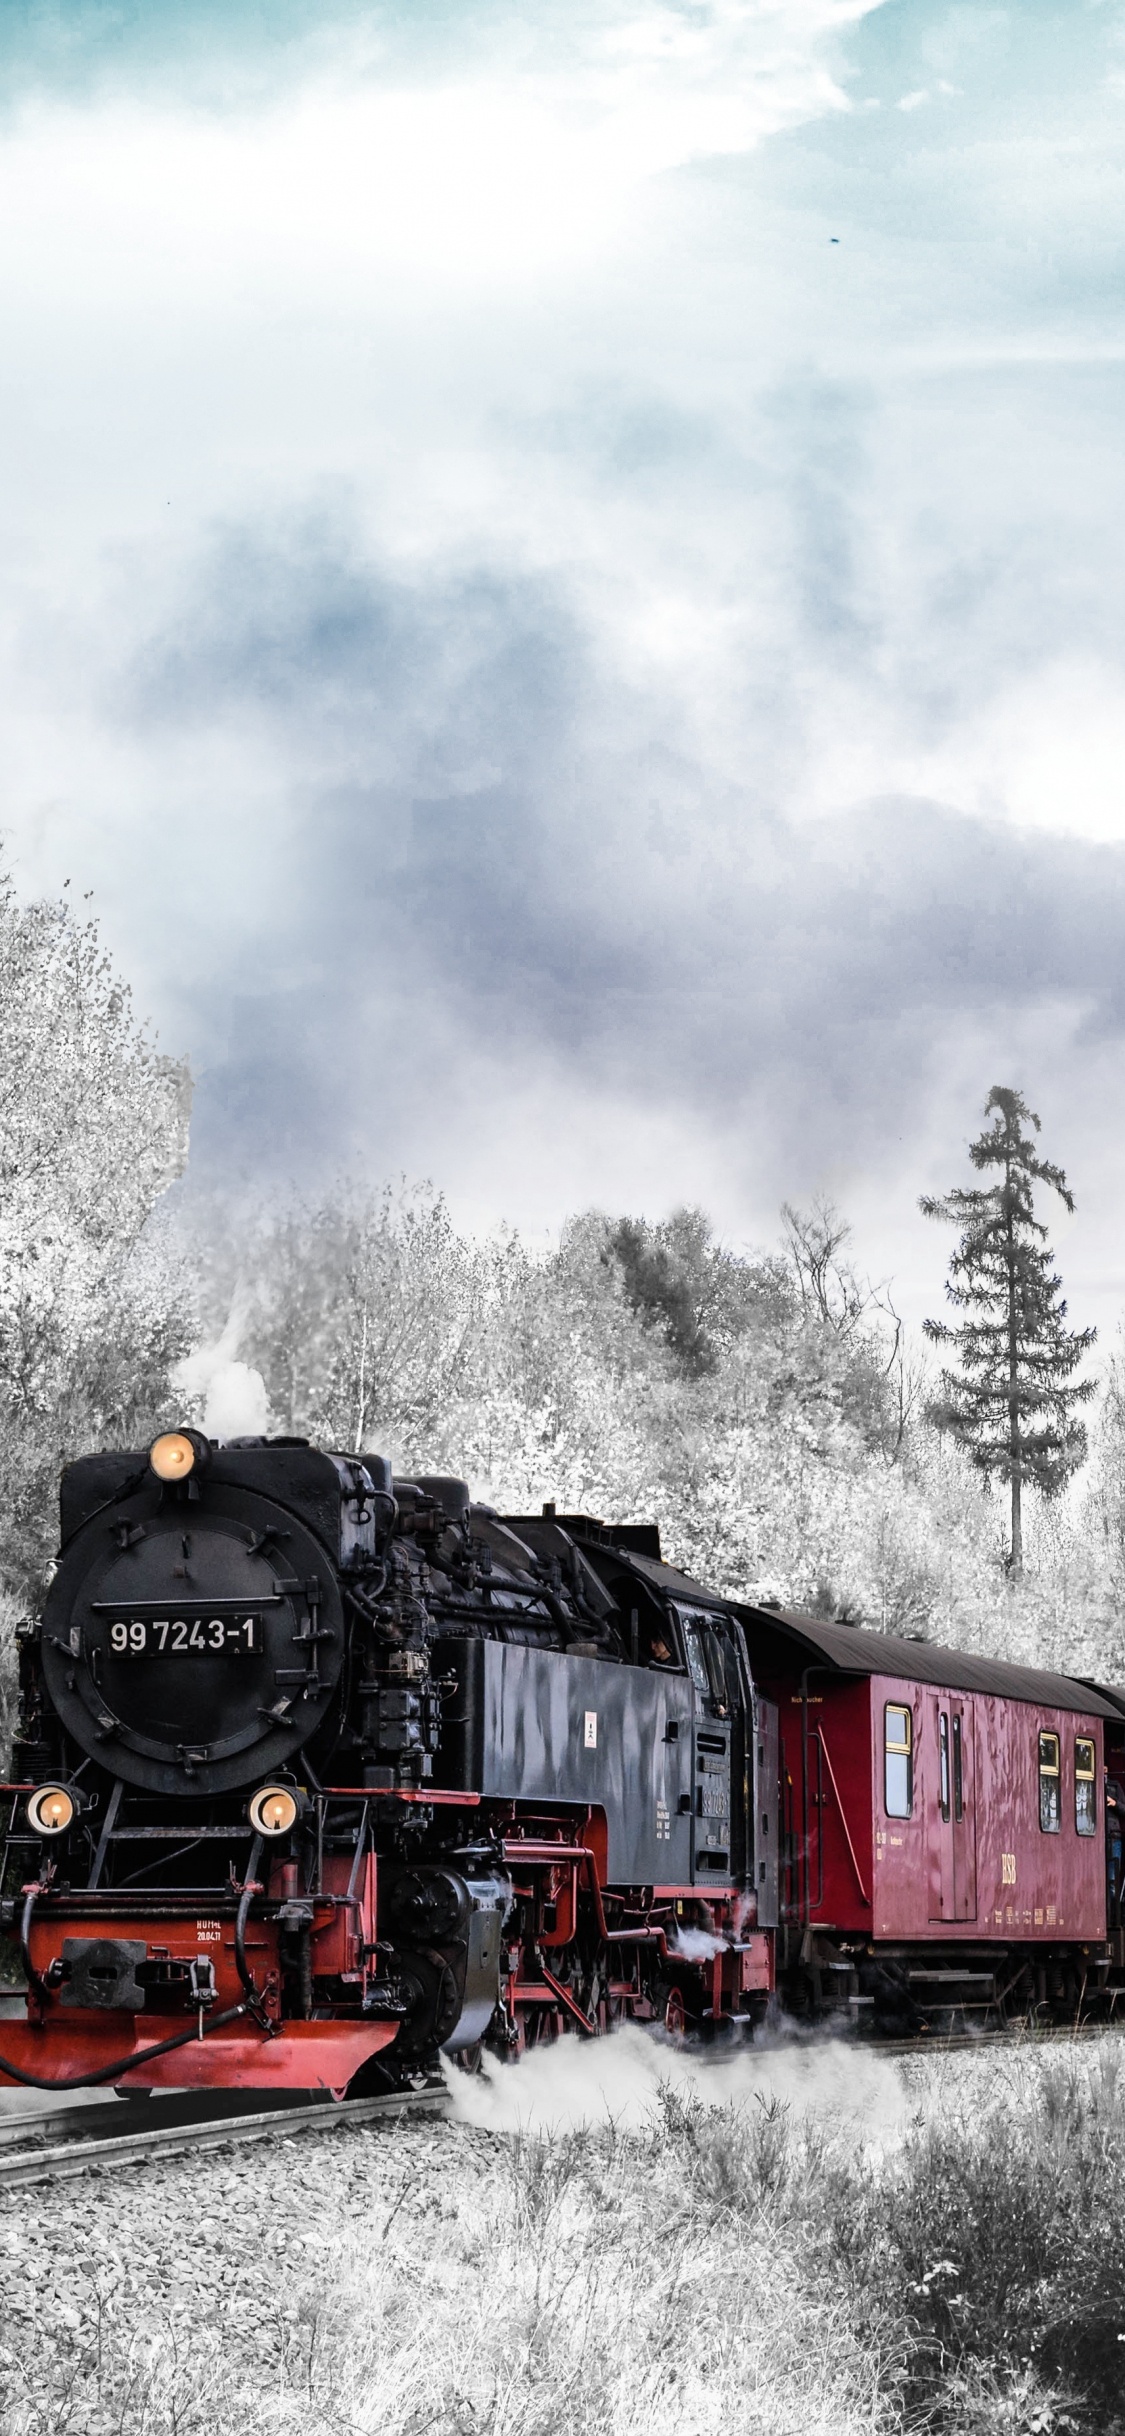 Red and Black Train on Rail Tracks Under Cloudy Sky. Wallpaper in 1125x2436 Resolution